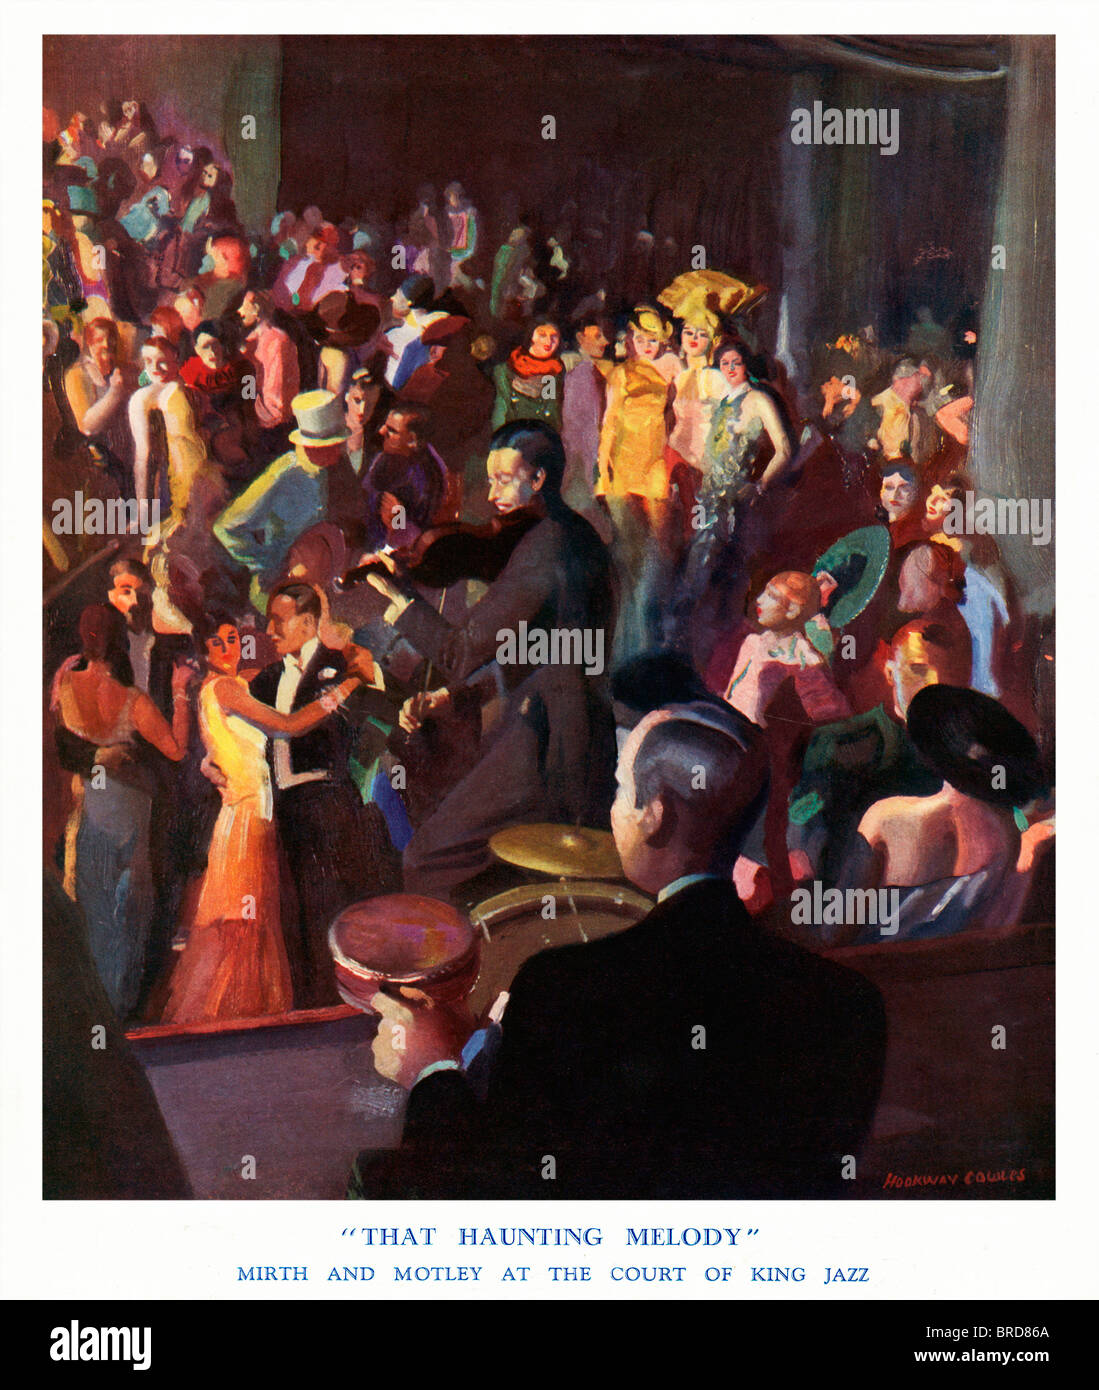 That Haunting Melody, 1930 illustration of Mirth and Motley at the Court of King Jazz, dancing in a fashionable London club Stock Photo